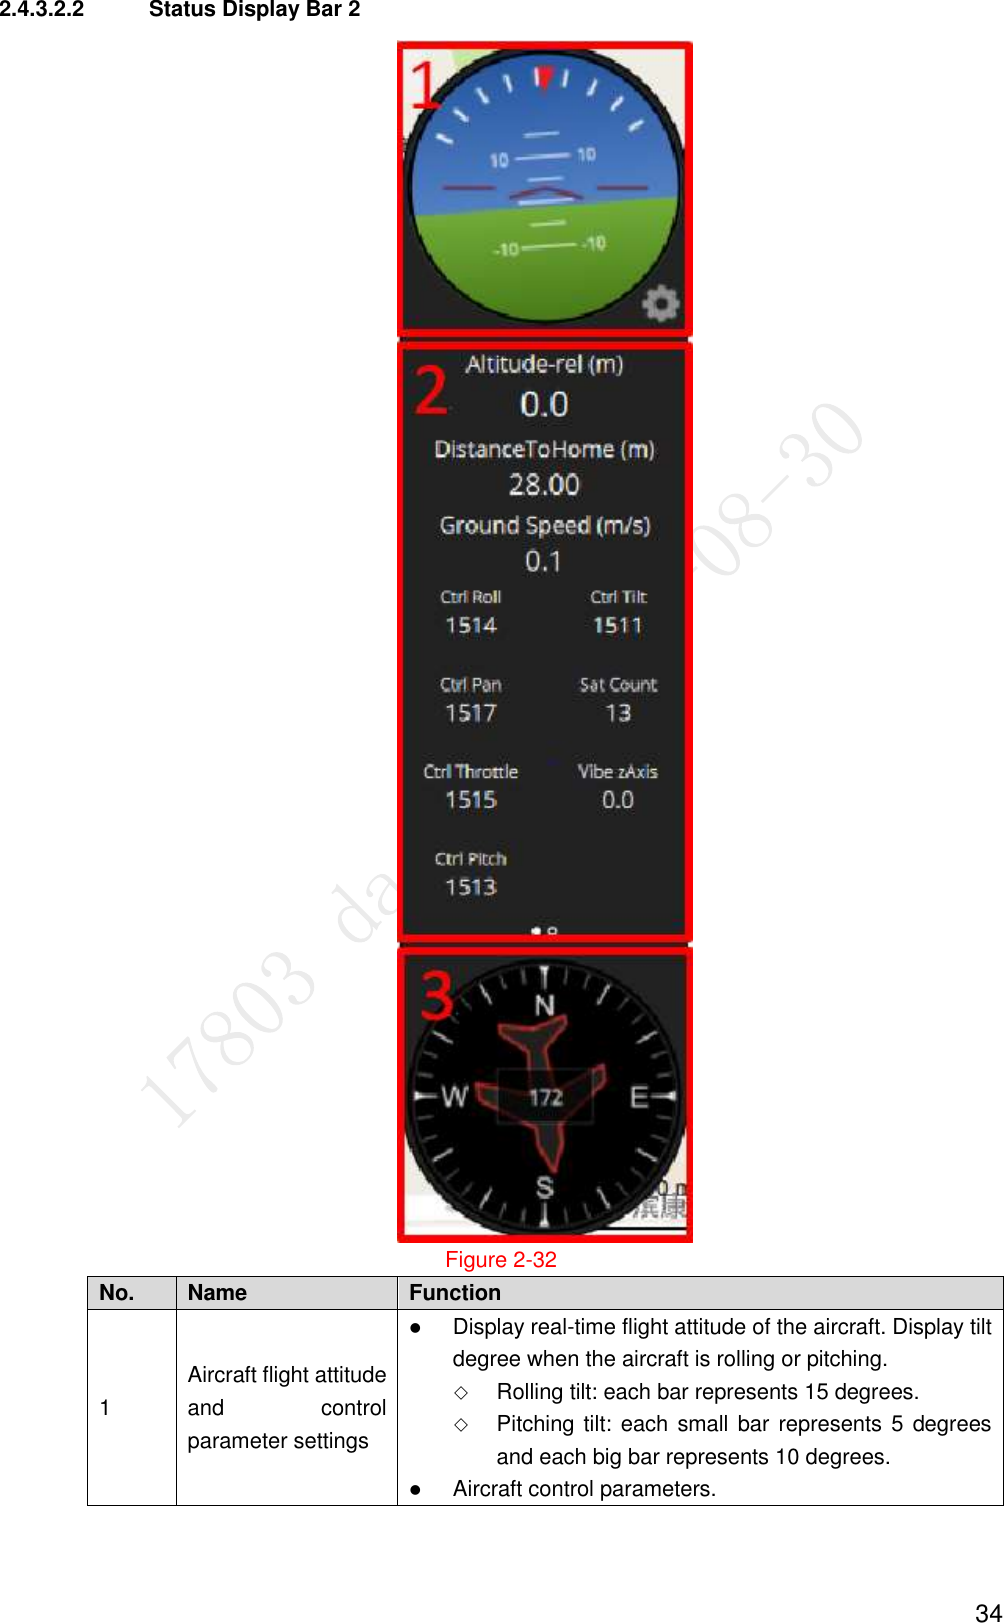  34 2.4.3.2.2  Status Display Bar 2  Figure 2-32 No. Name   Function   1 Aircraft flight attitude and  control parameter settings  Display real-time flight attitude of the aircraft. Display tilt degree when the aircraft is rolling or pitching.  Rolling tilt: each bar represents 15 degrees.    Pitching tilt: each small bar represents 5  degrees and each big bar represents 10 degrees.  Aircraft control parameters. 